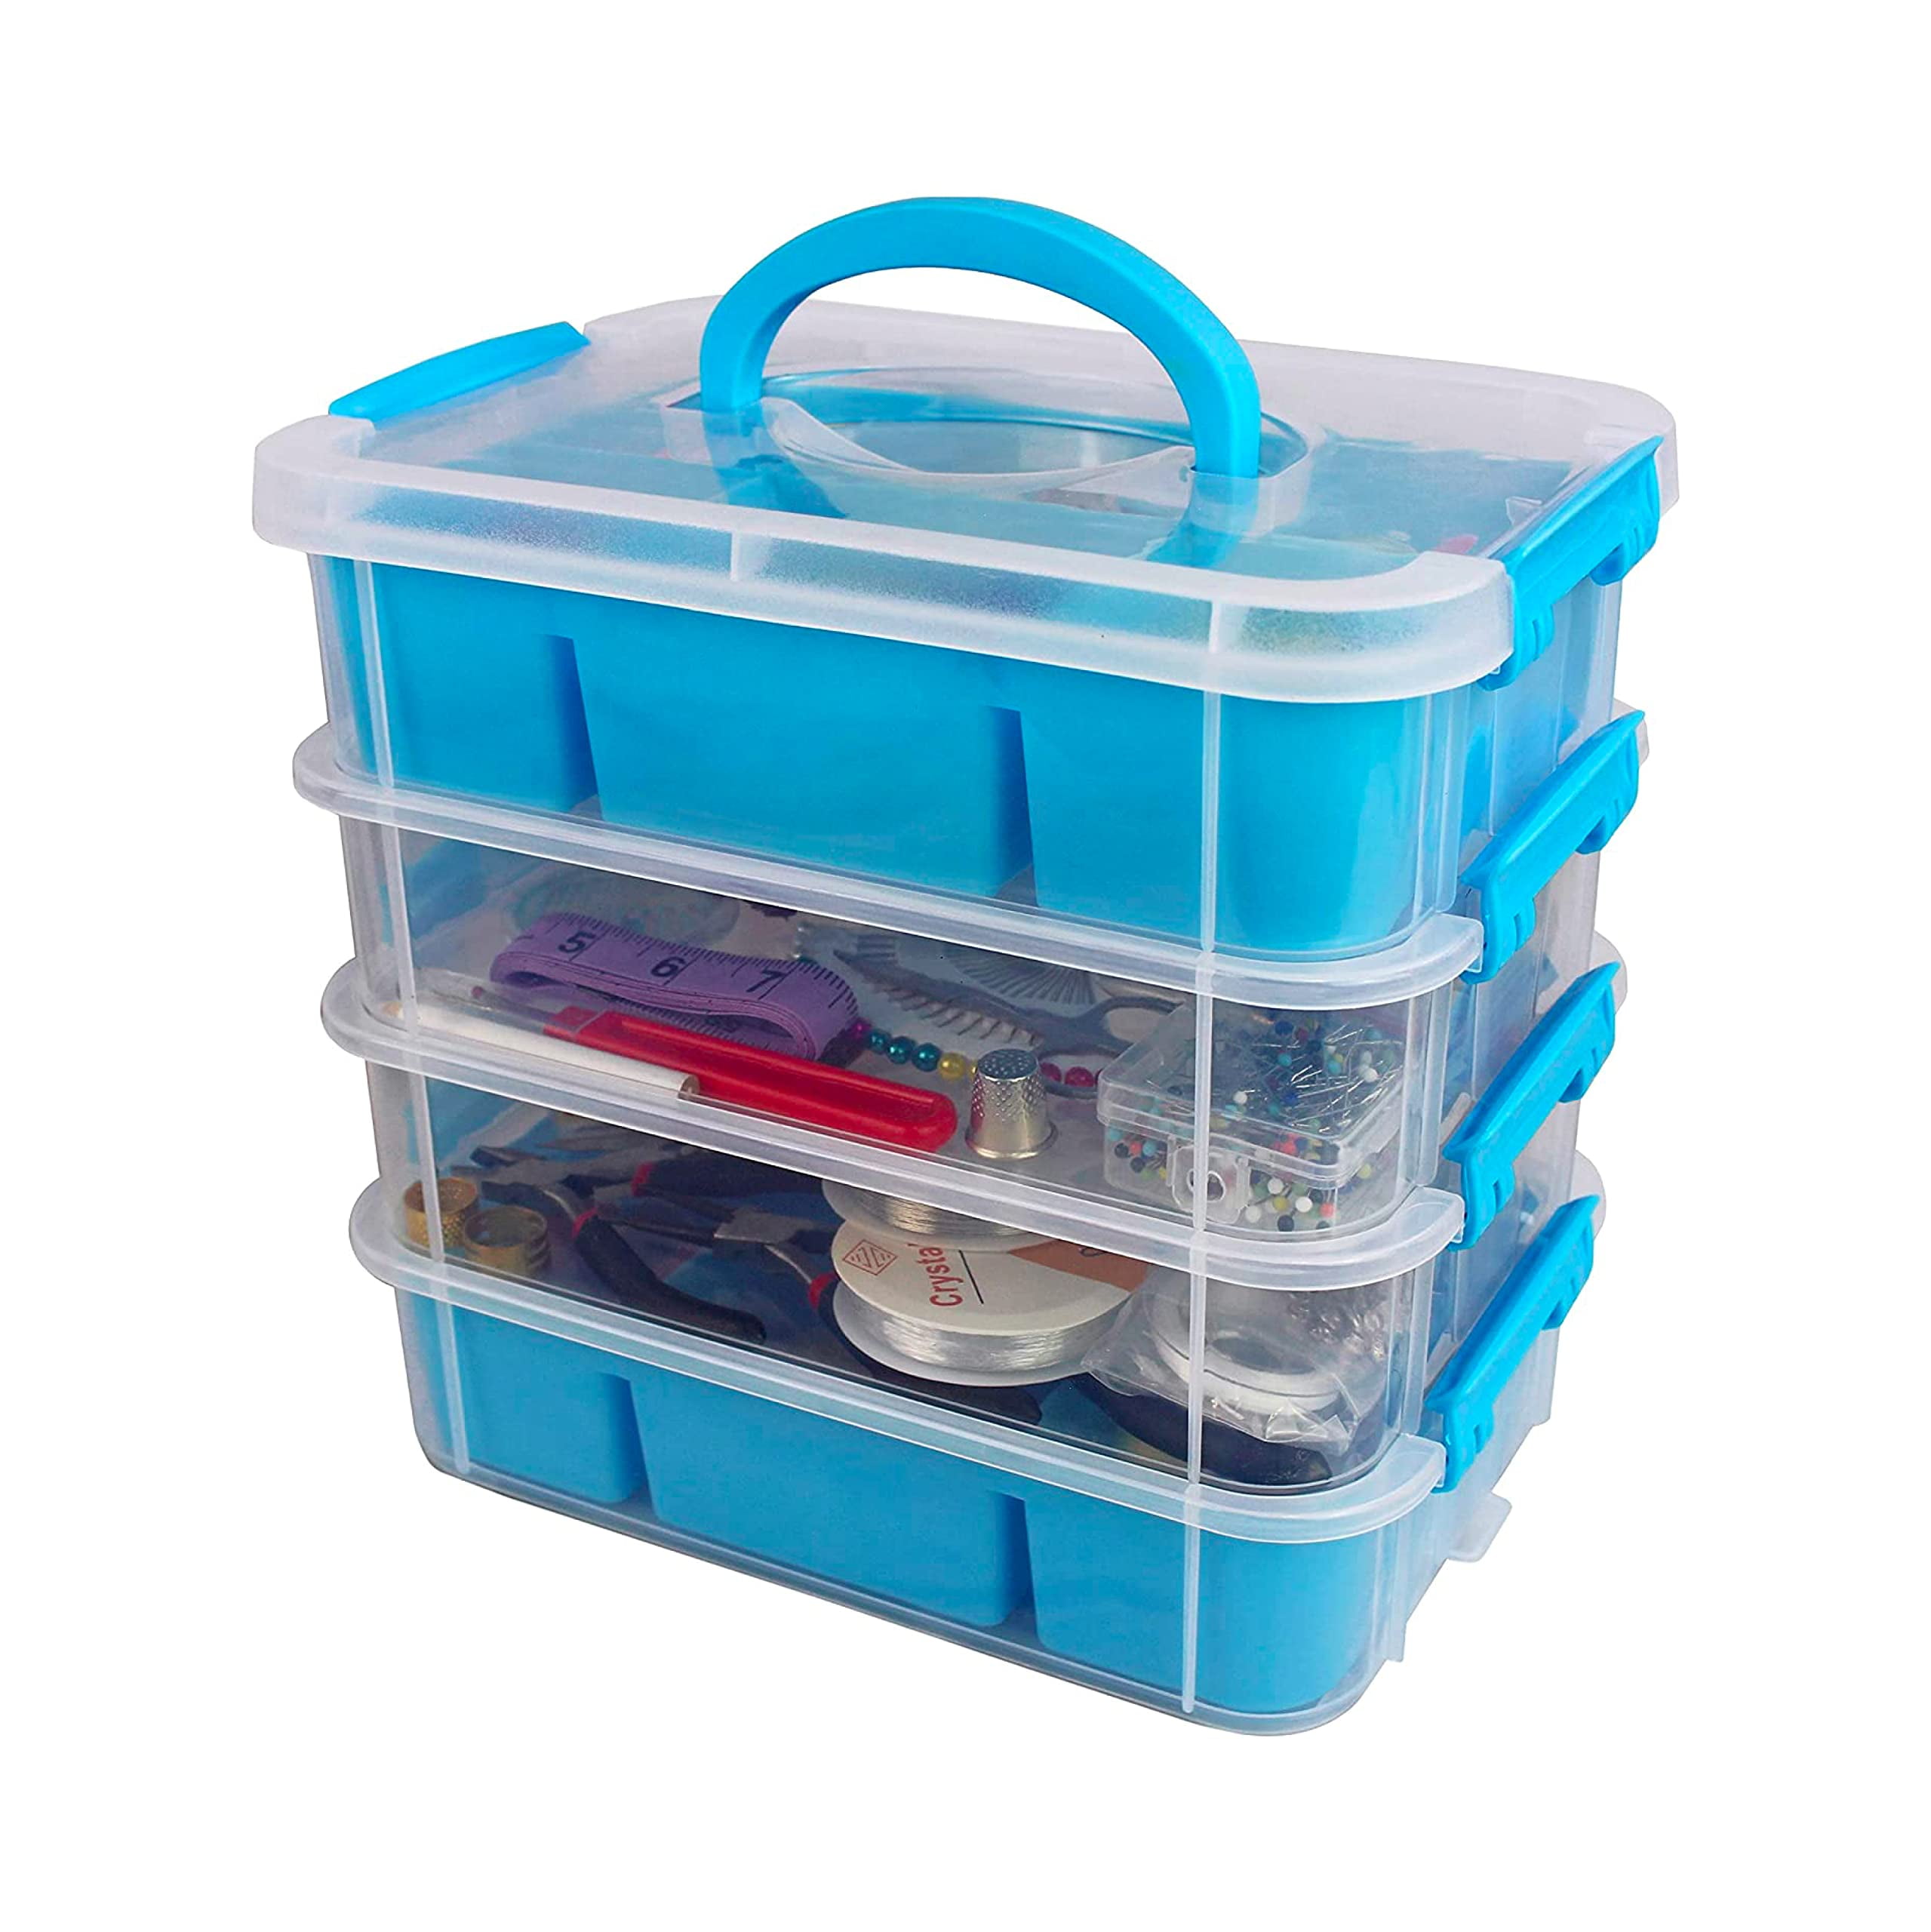 Olly Kids Craft Kits Library in a Plastic Craft Box Organizer- Craft and  Art Supplies for Kids Ages 4 5 6 7 8 9 10 11 &12 Year Old Boys & Girls